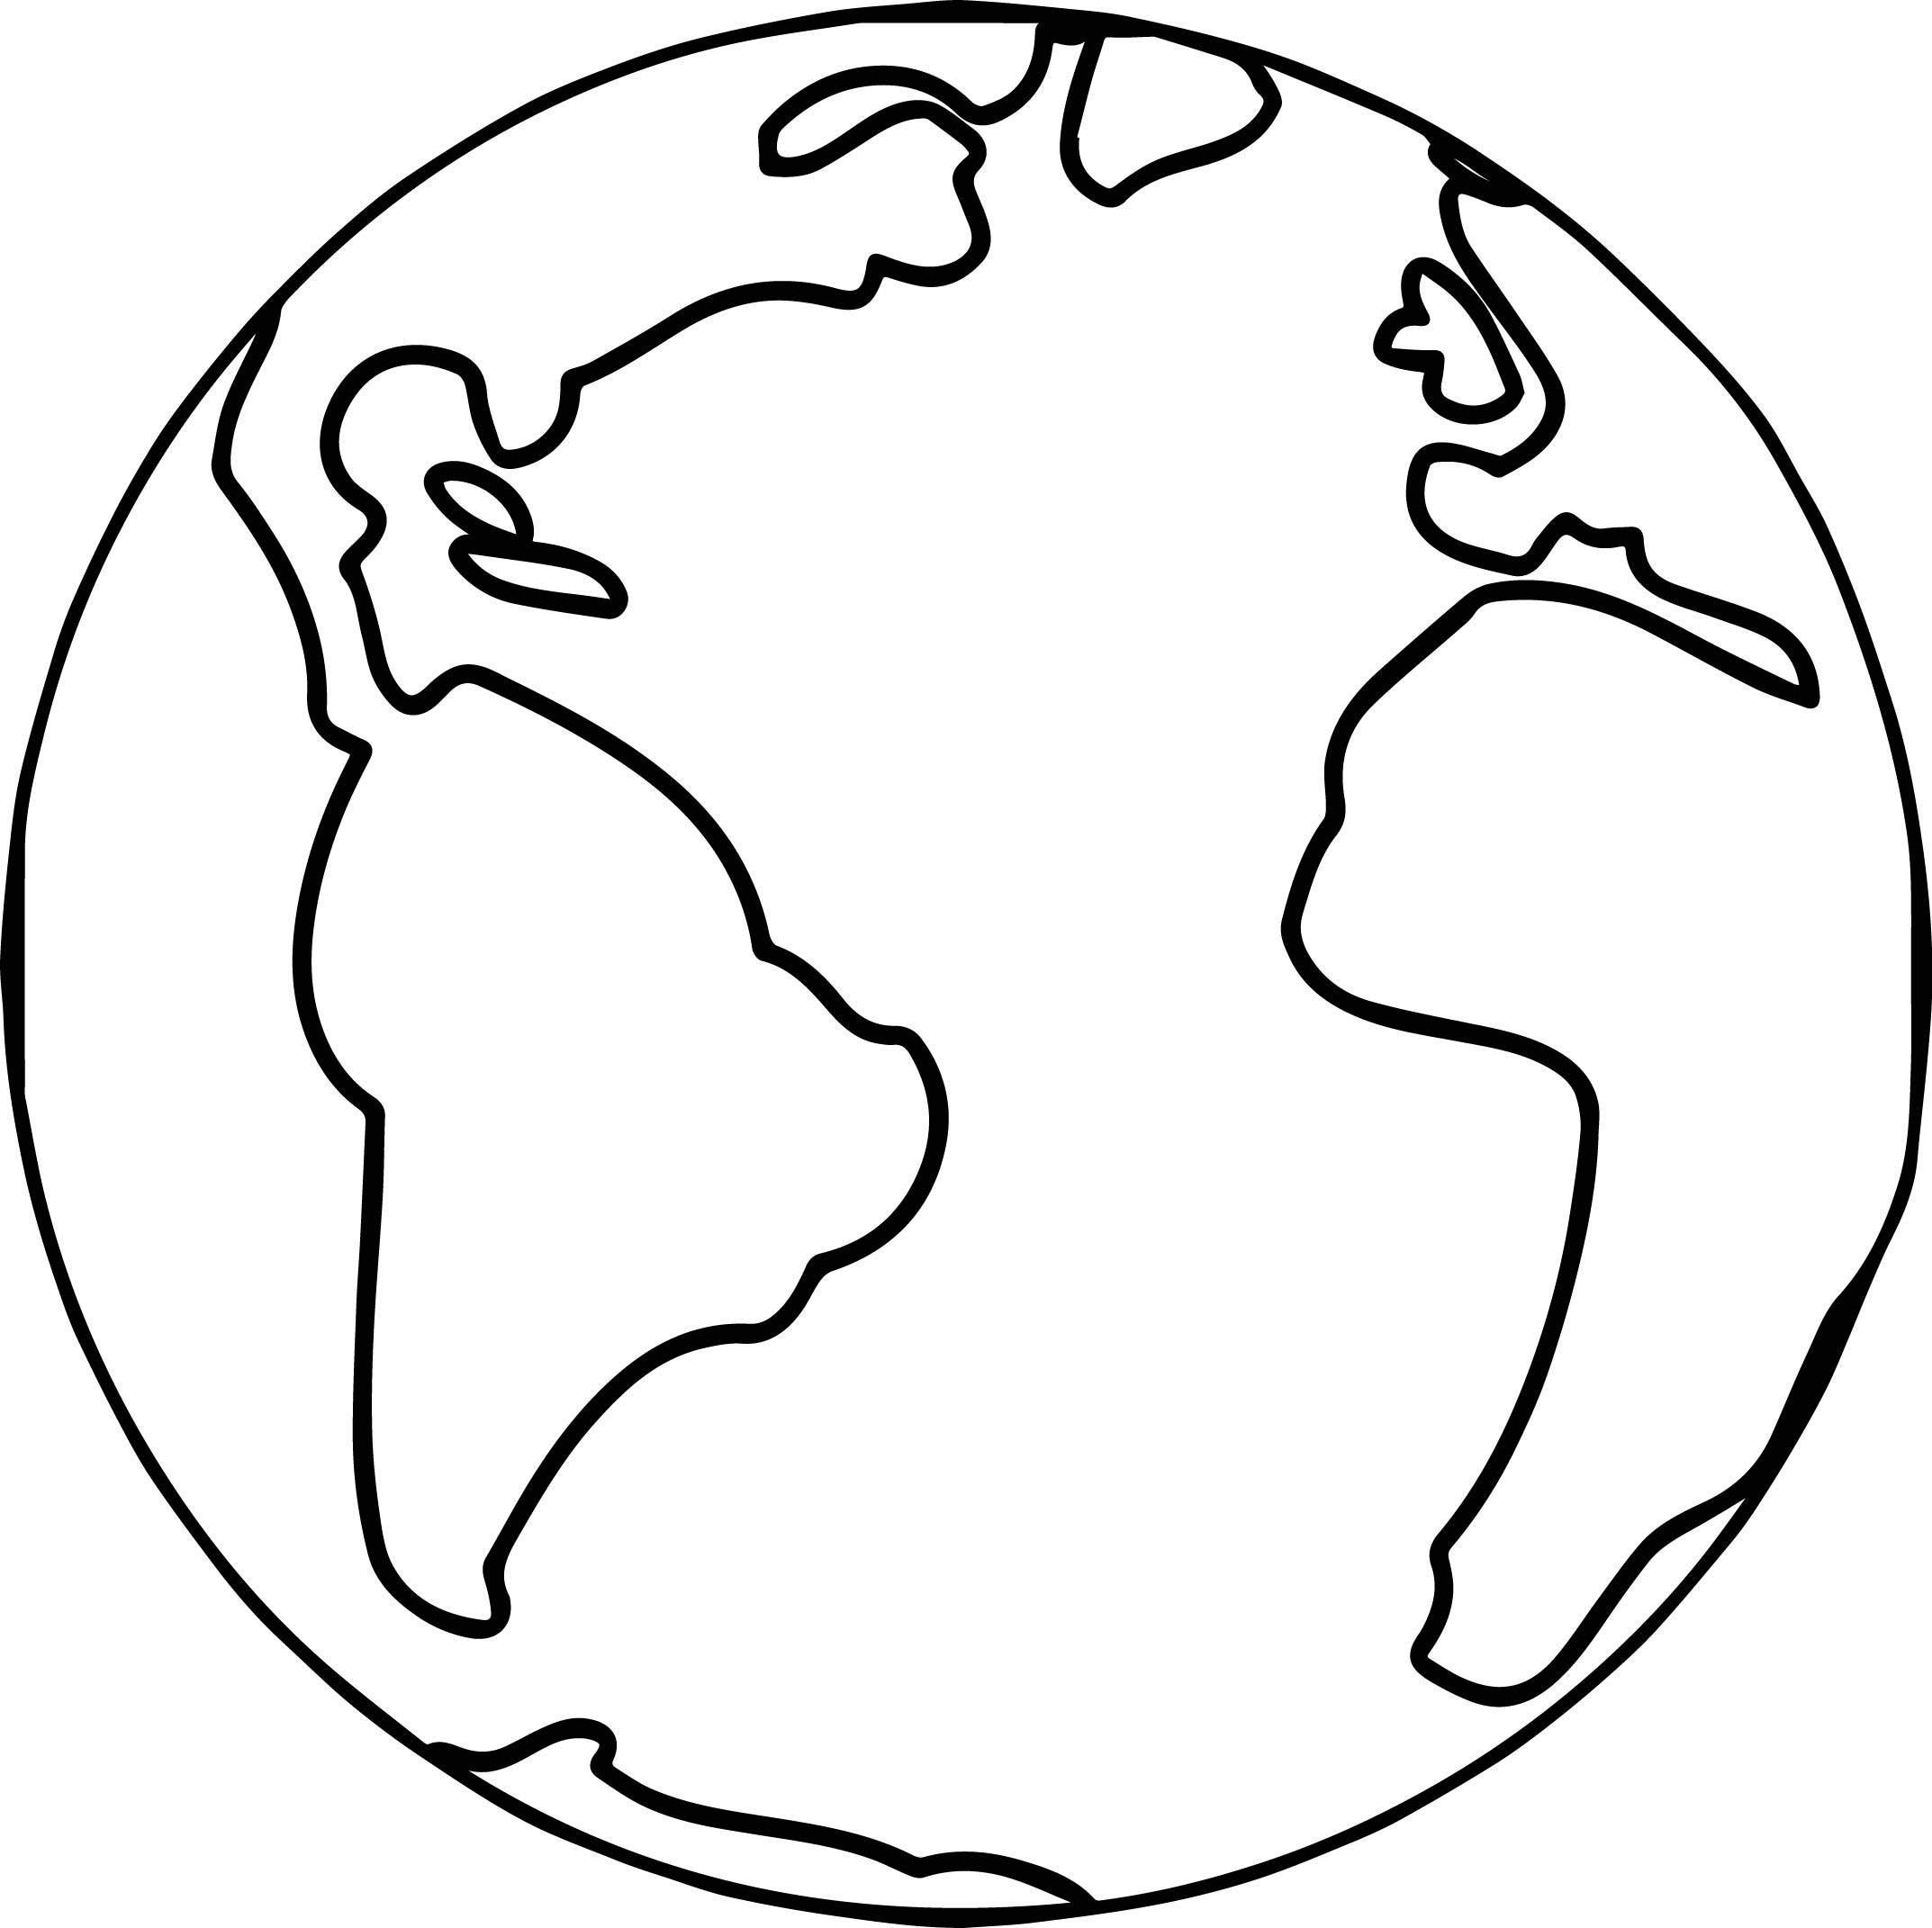 Line Drawing Of The Earth